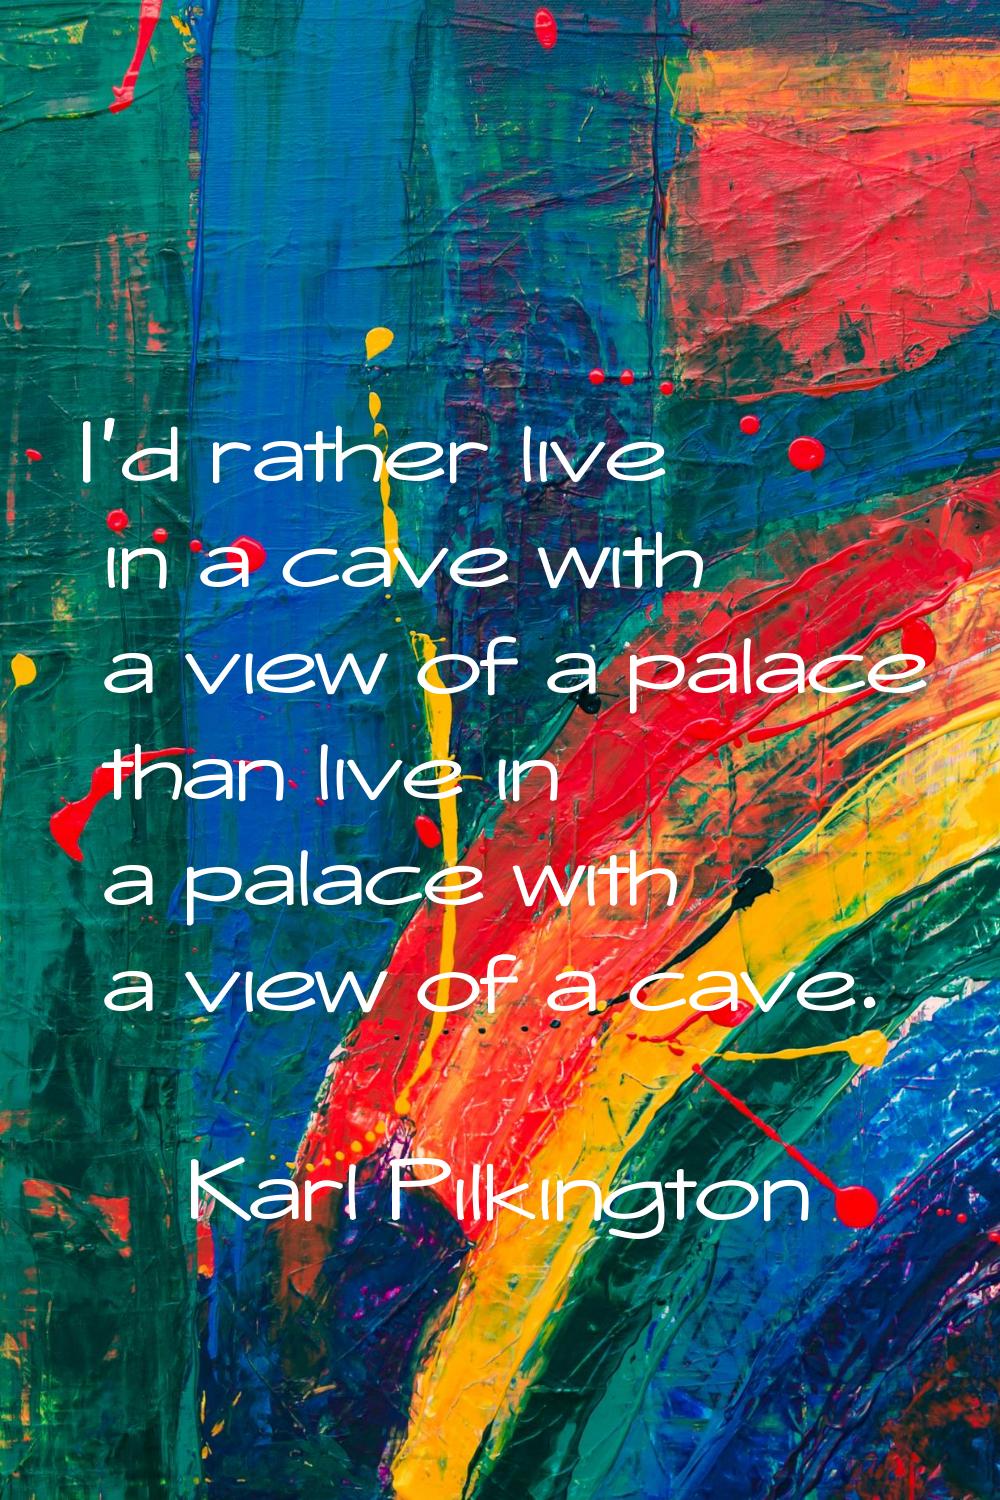 I'd rather live in a cave with a view of a palace than live in a palace with a view of a cave.